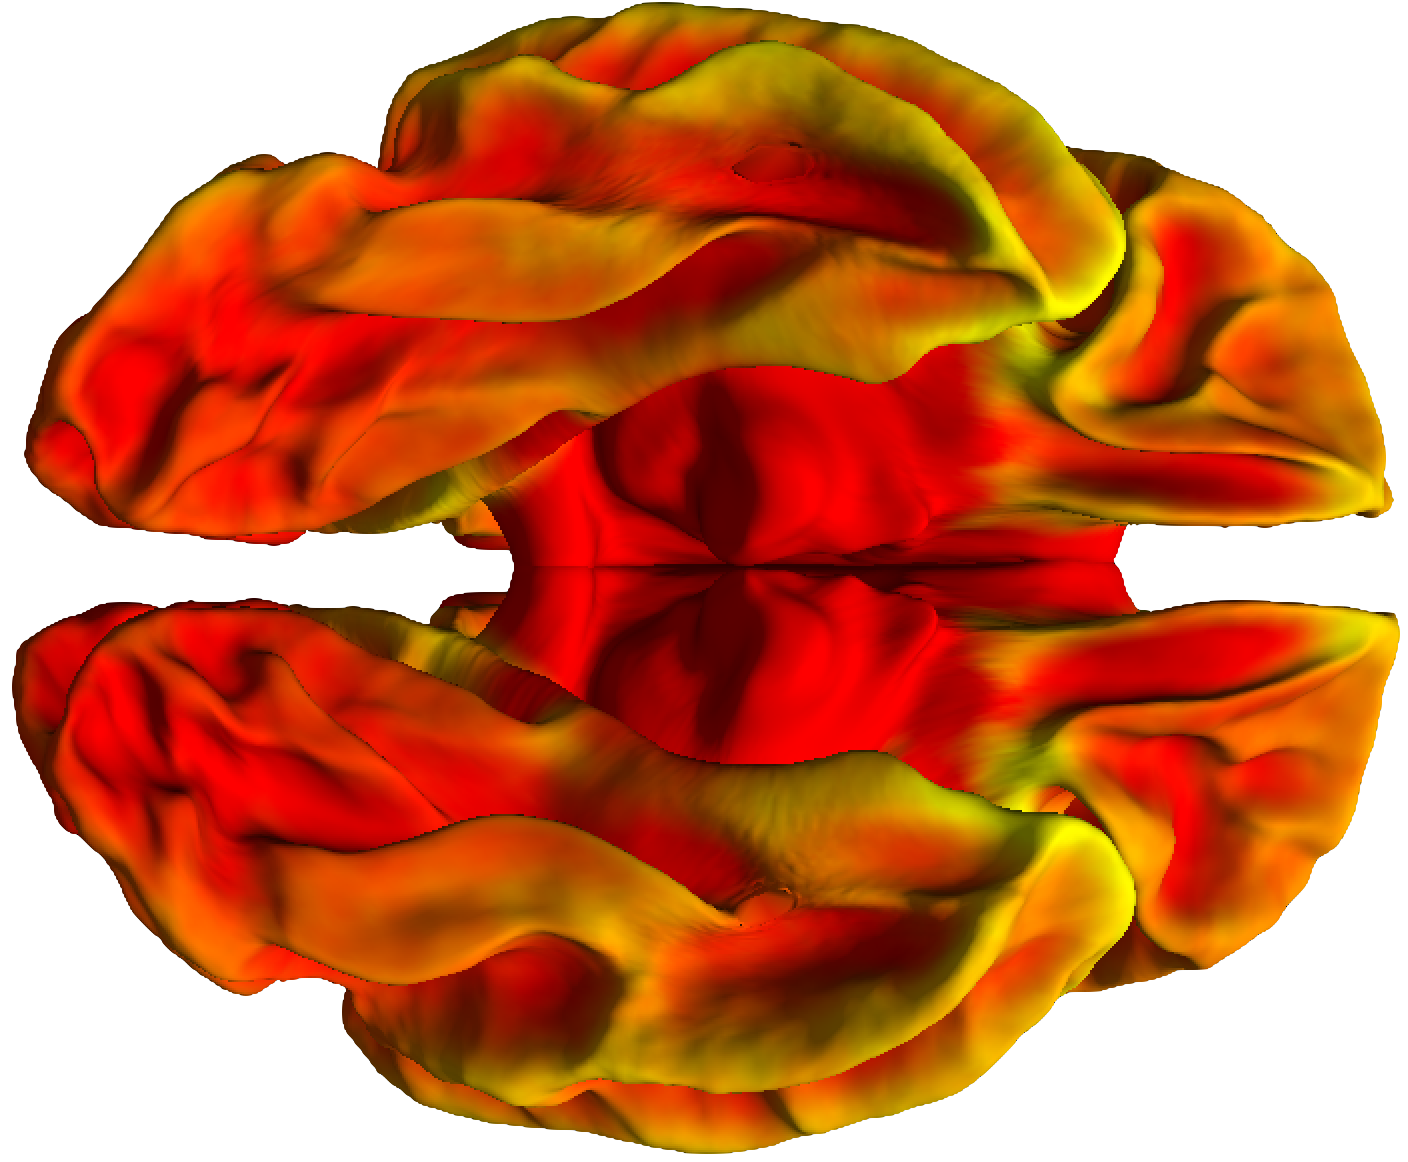 ventral view of a brain surface